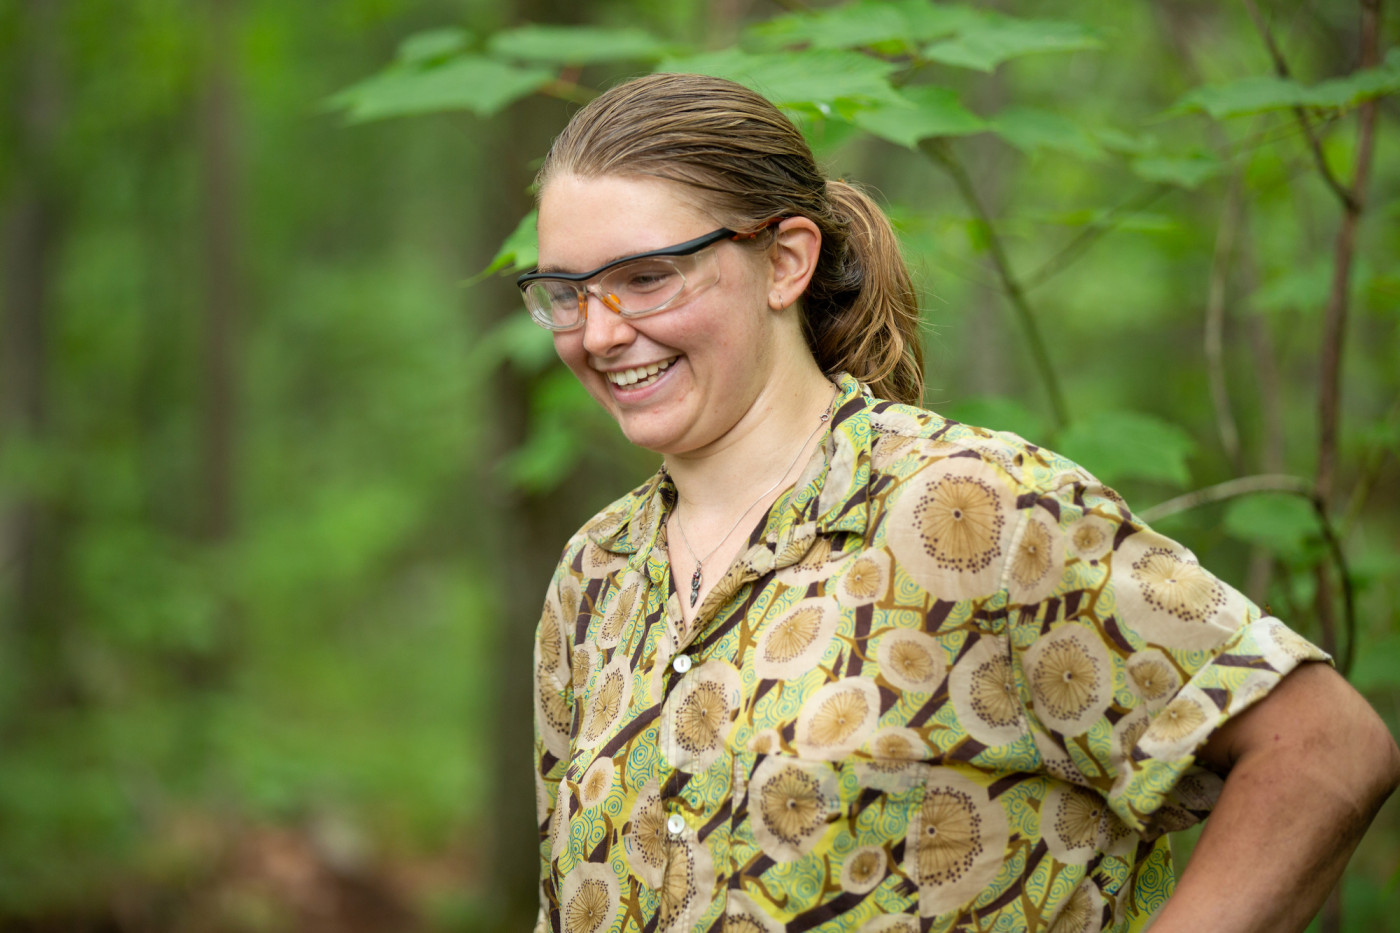 Poke-O-Moonshine was Adirondack Trail Crew leader Char's third all-woman project.